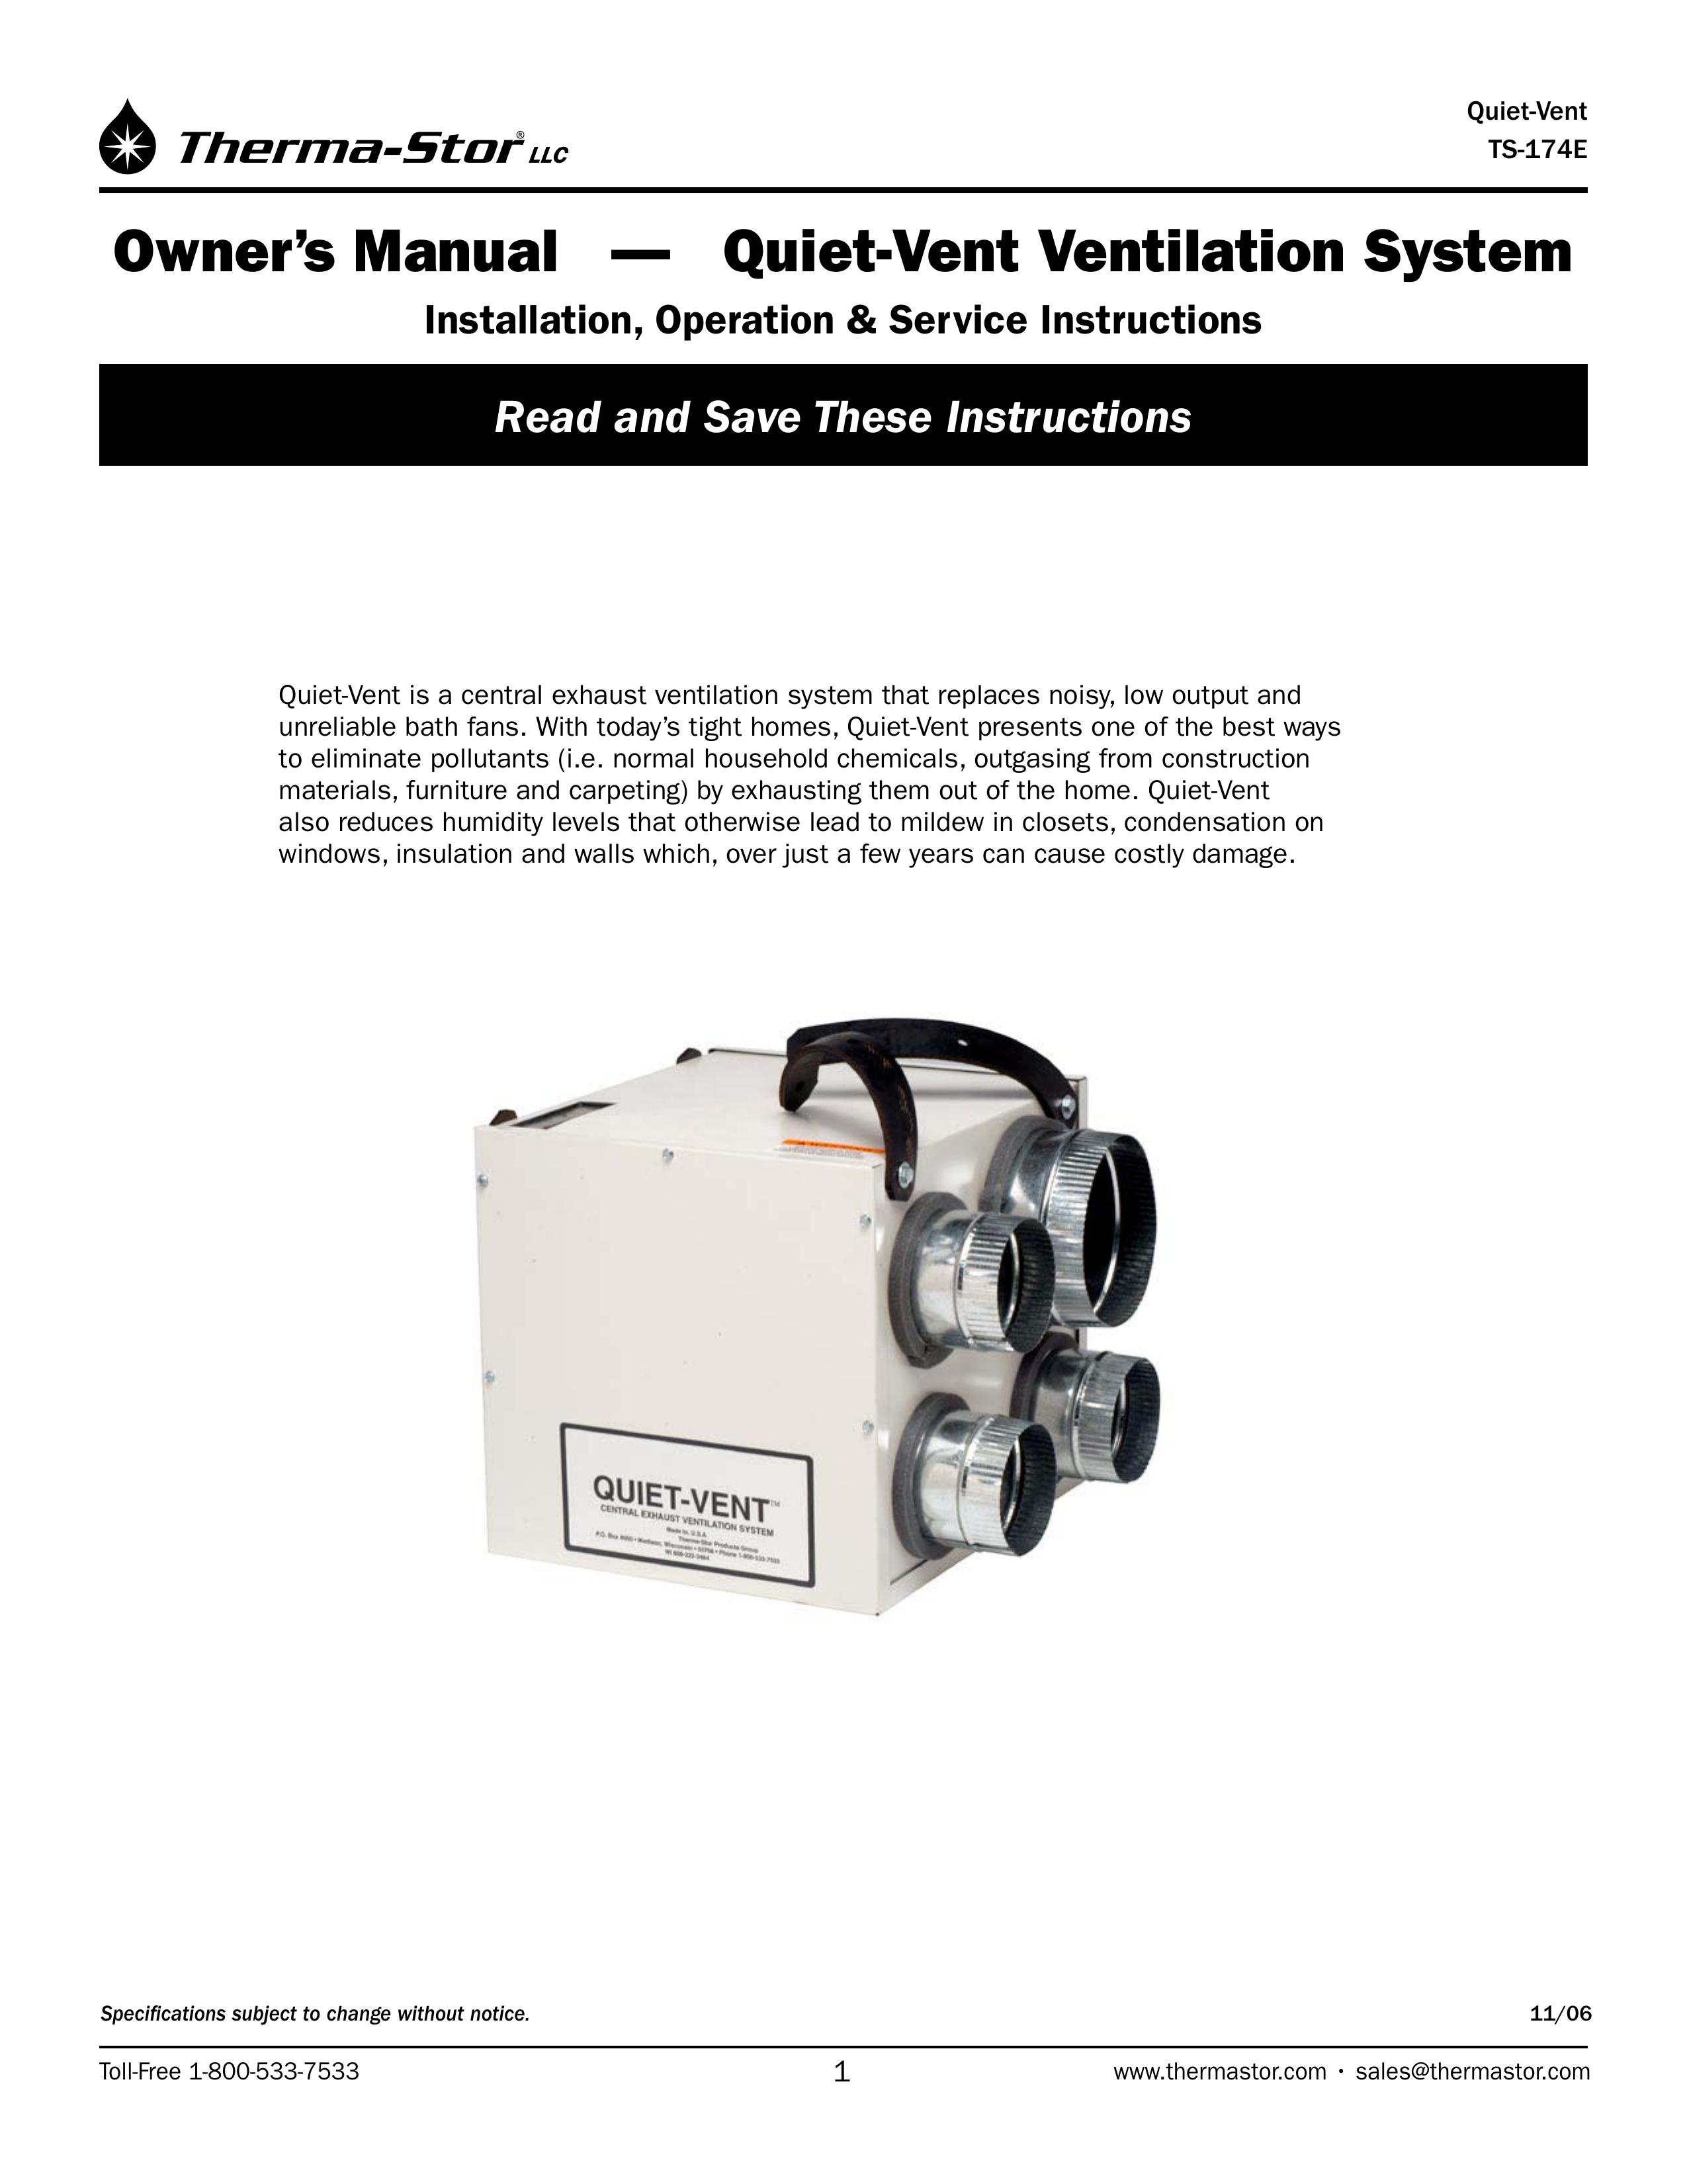 Therma-Stor Products Group Quiet-Vent Ventilation System Ventilation Hood User Manual